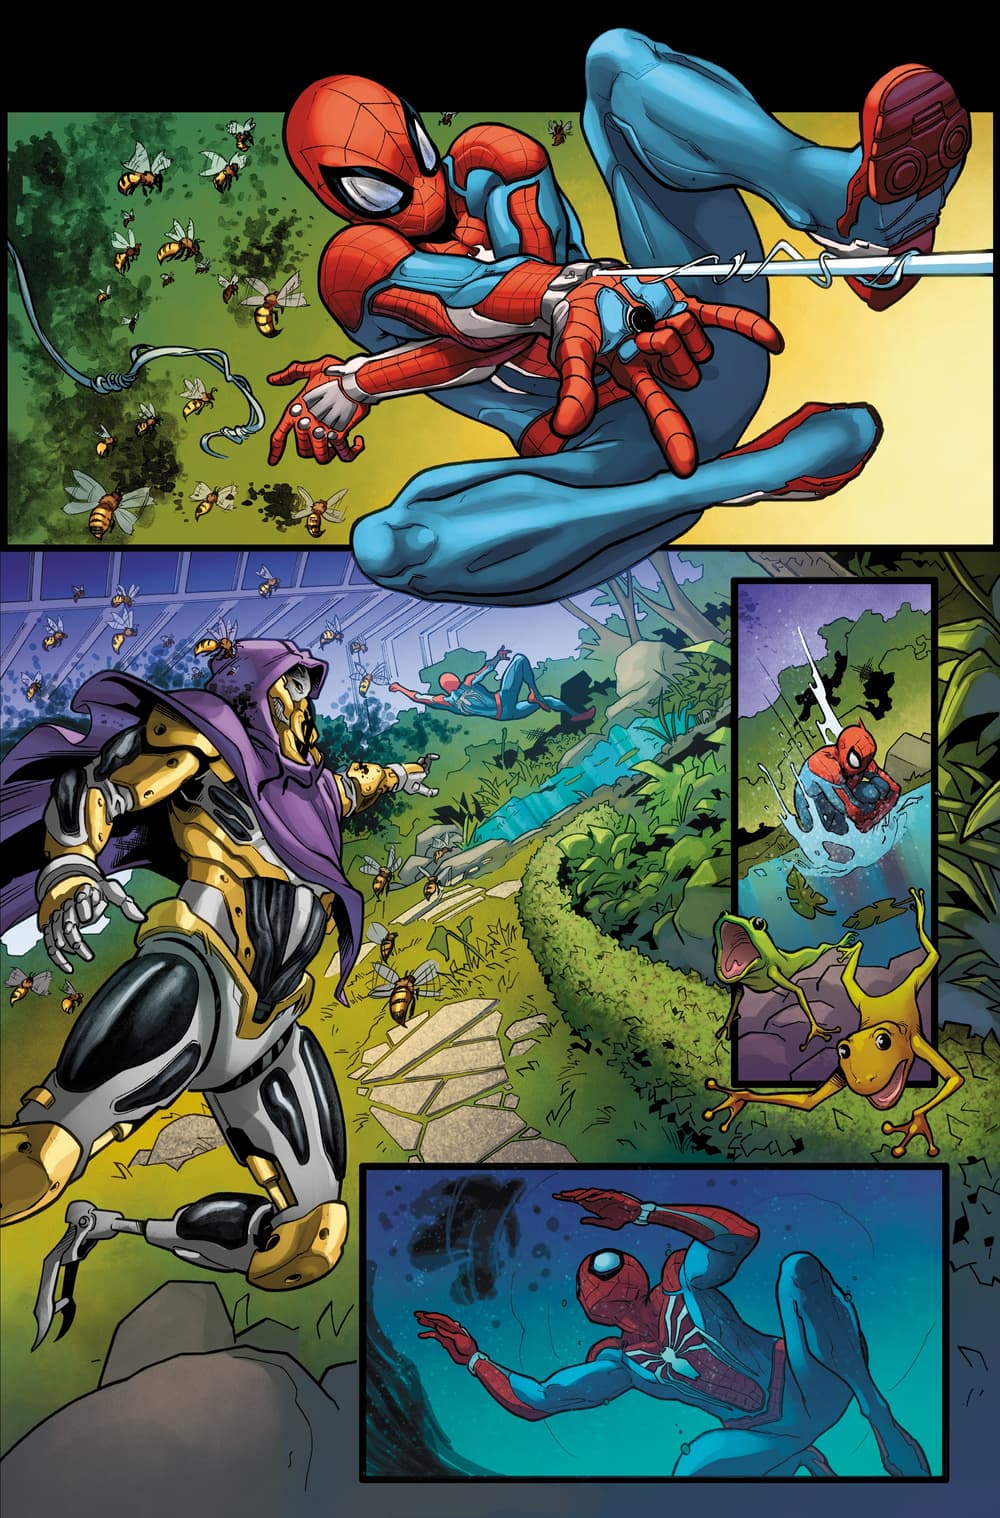 MARVEL'S SPIDER-MAN: VELOCITY #1 pencils by Emilio Laiso with colors by Rachelle Rosenberg